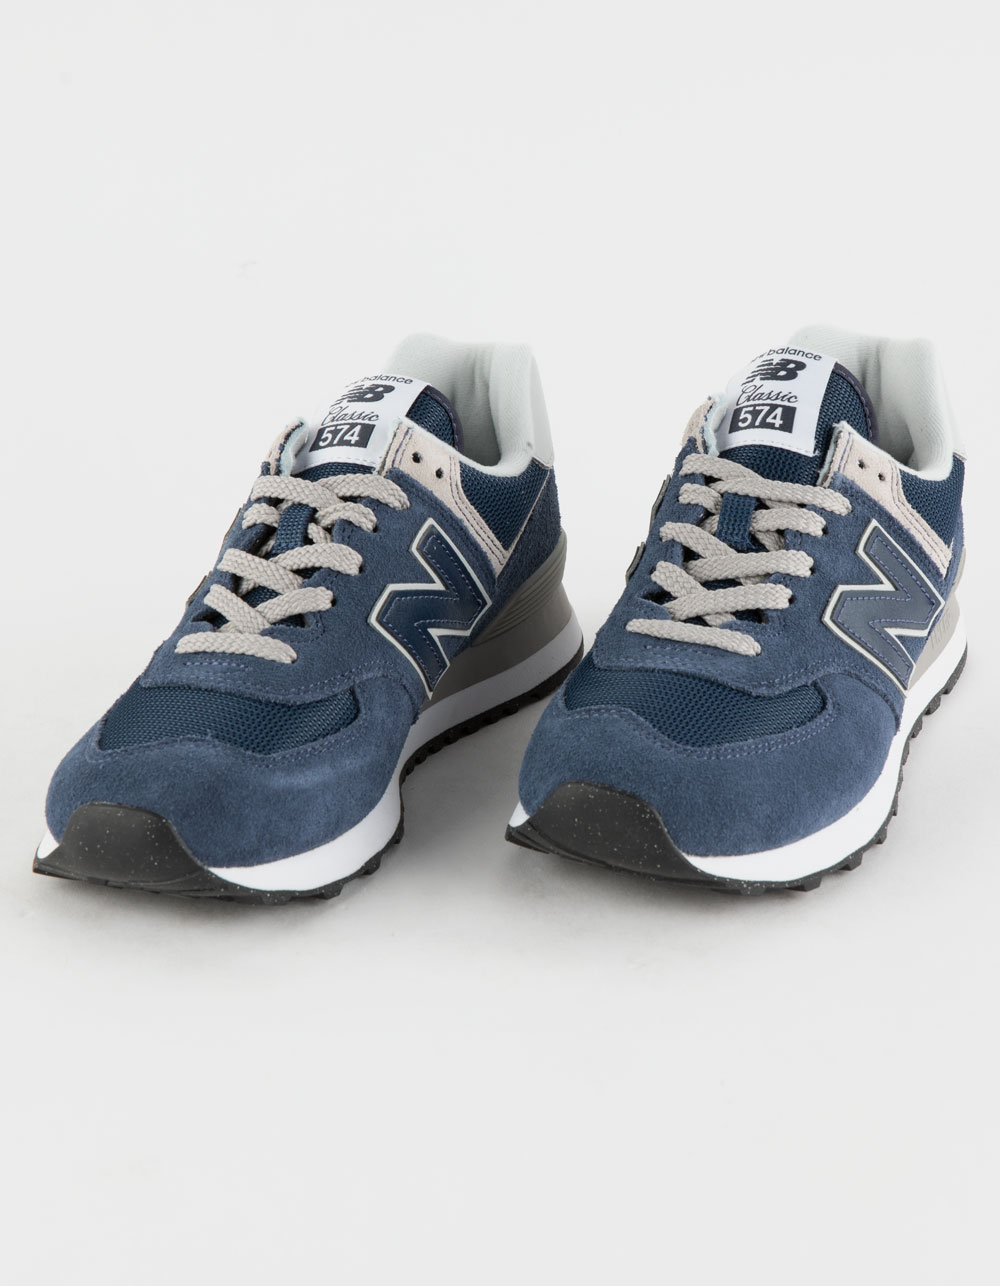 NEW BALANCE 574 Womens Shoes - NAVY/WHITE Tillys